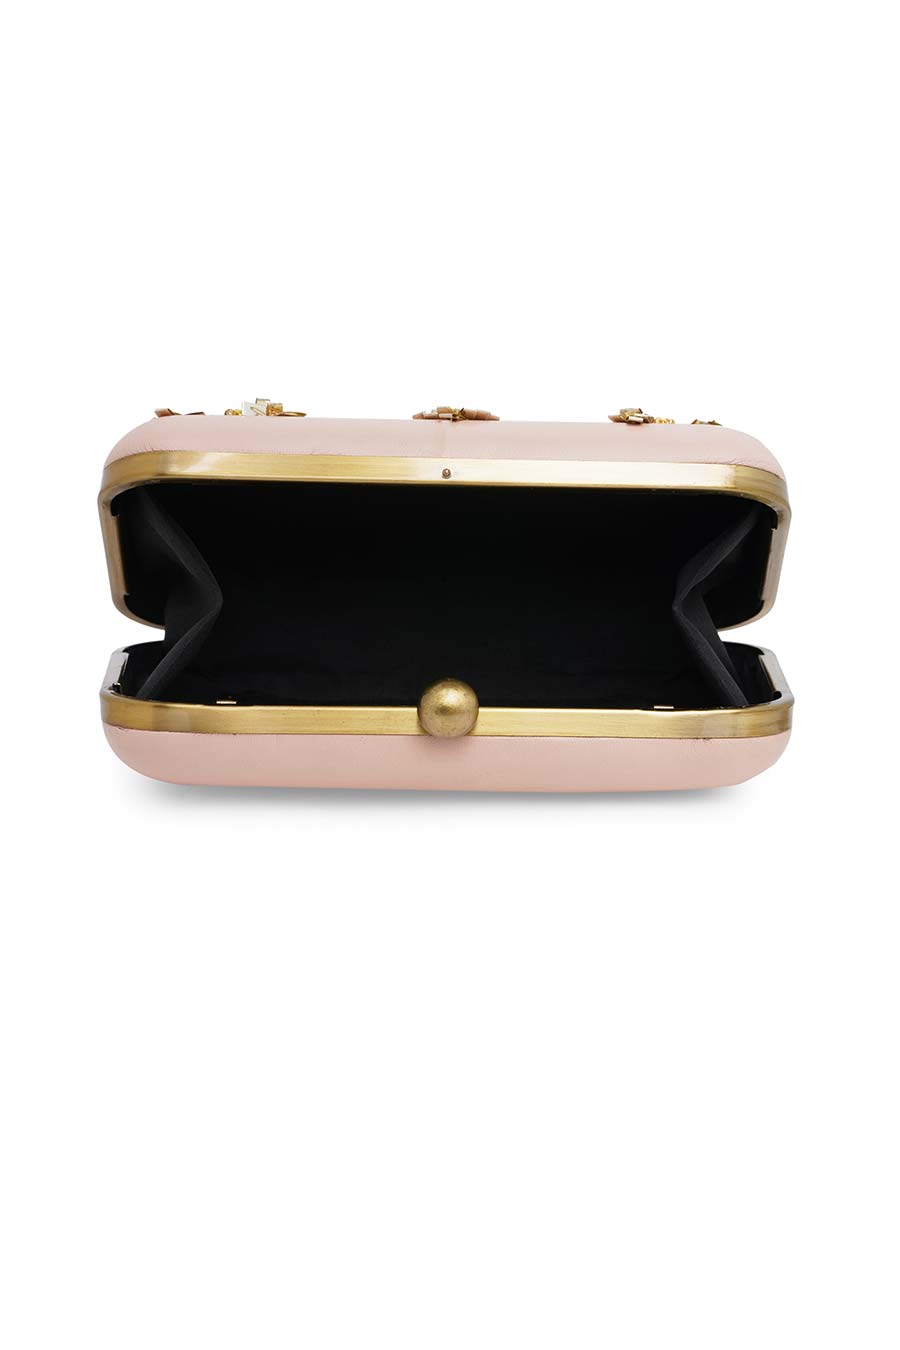 Pink & Gold Embroidered Leather Clutch